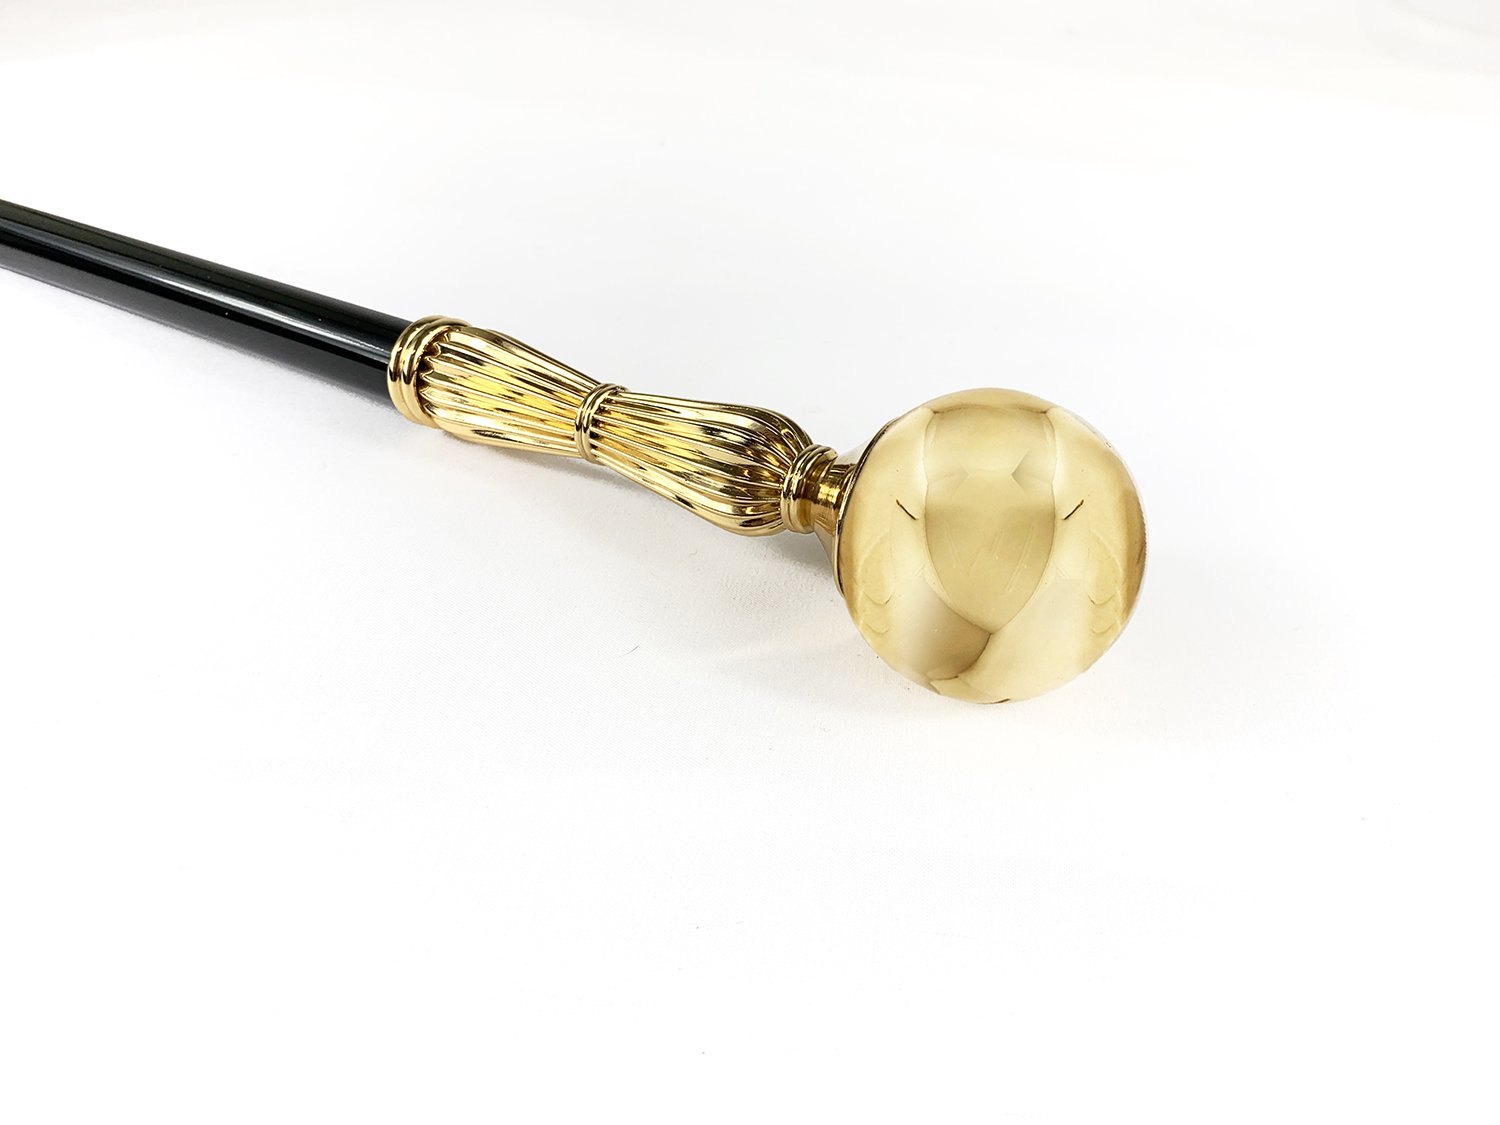 Sturdy and Elegant  Walking Stick - Brass Sphere With a Mirror Surface - IL MARCHESATO LUXURY UMBRELLAS, CANES AND SHOEHORNS